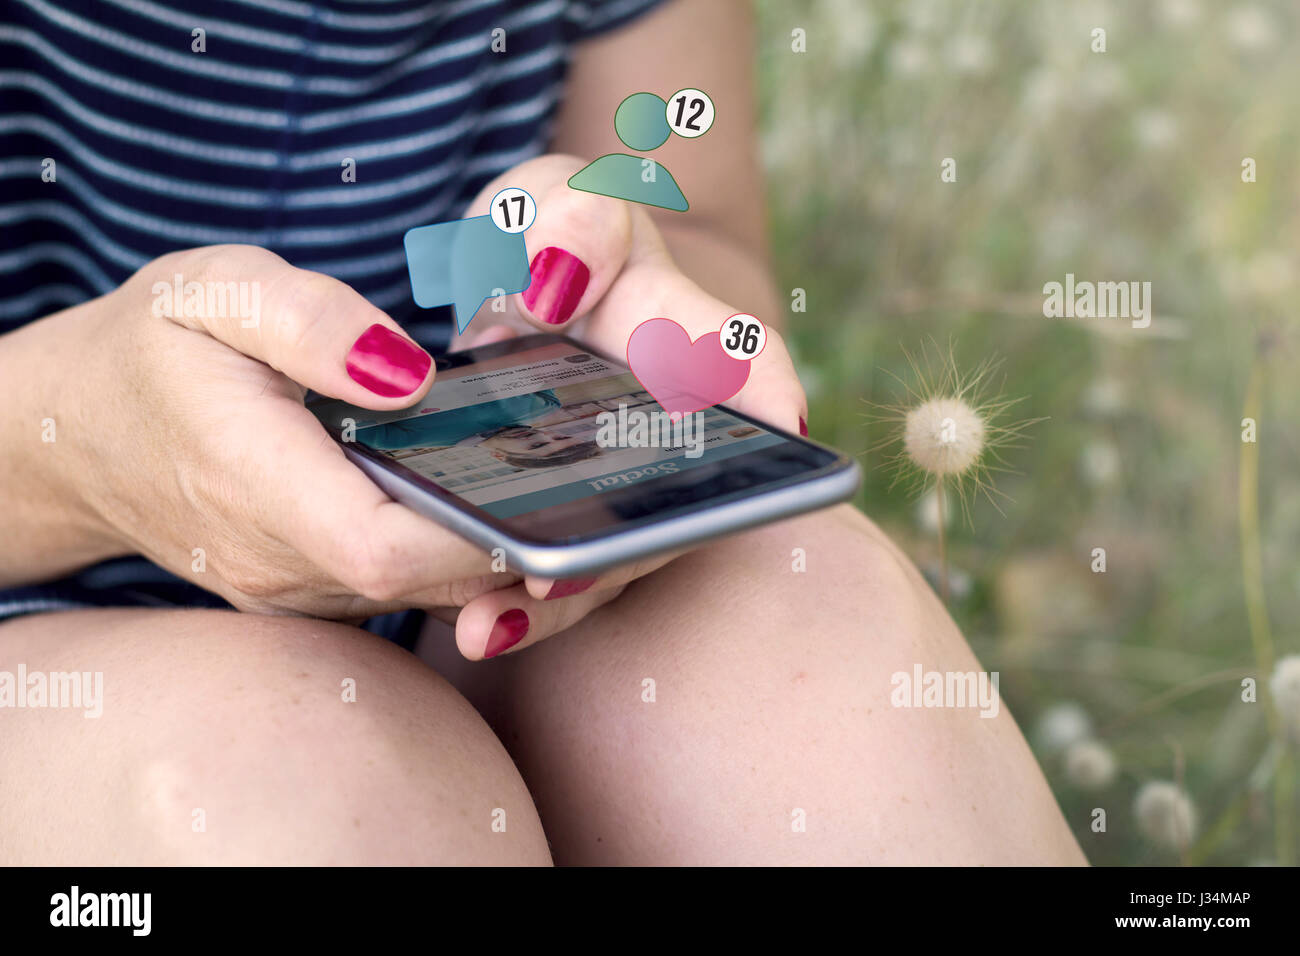 sitting woman checking social stats smartphone on the grass. All screen graphics are made up. Stock Photo